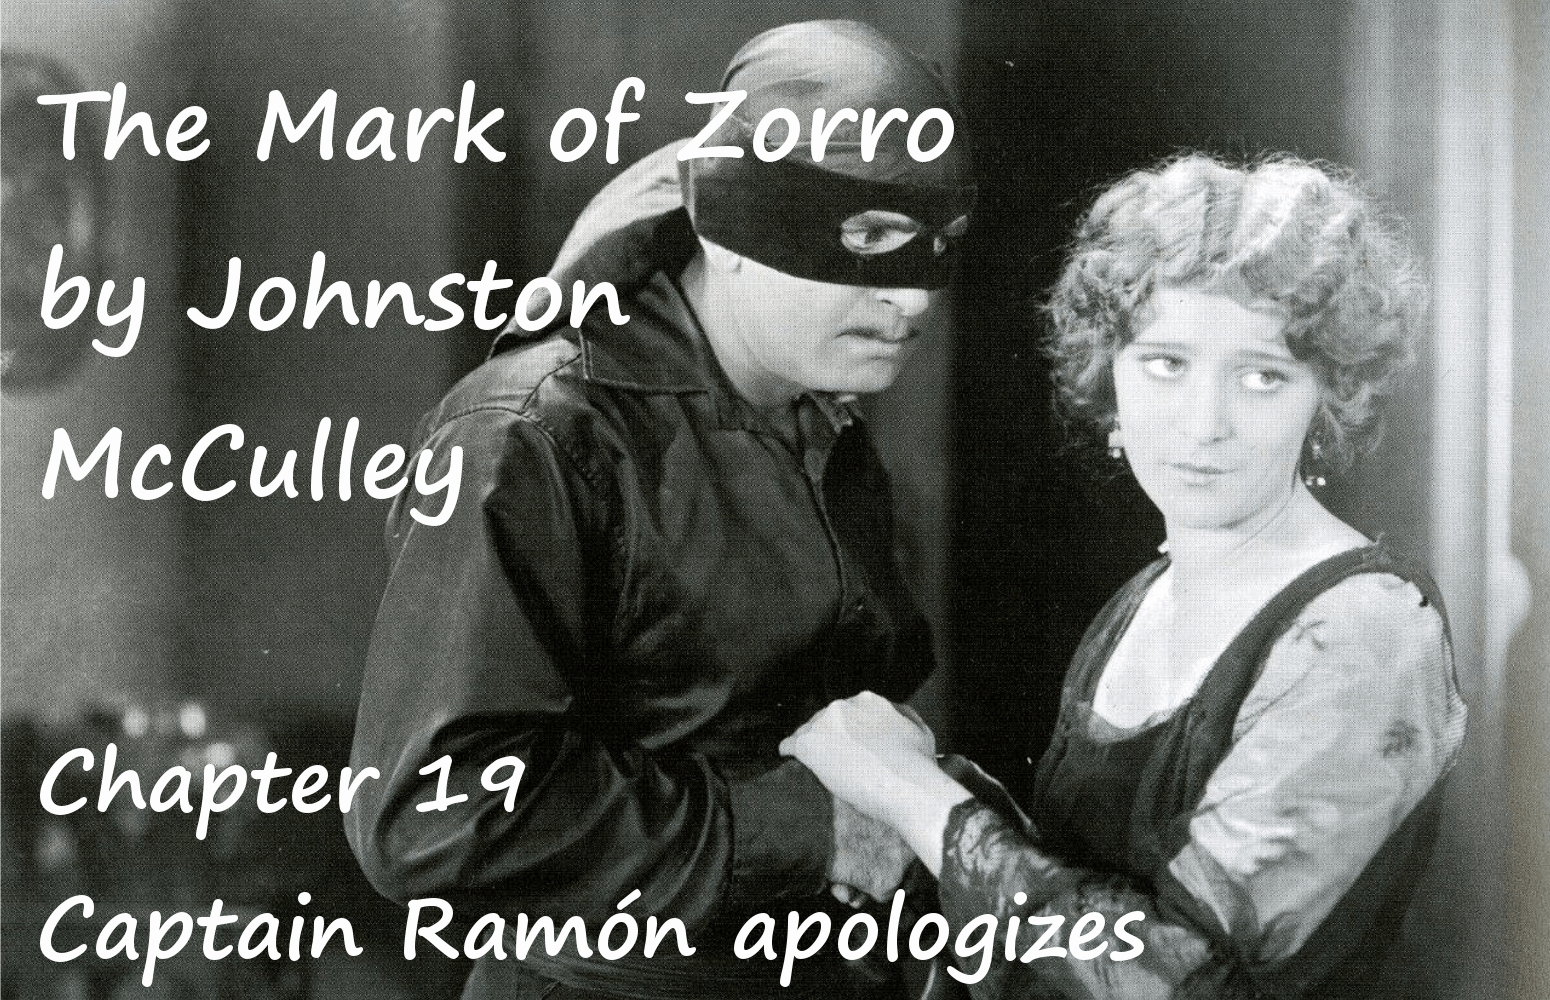 The Mark of Zorro chapter 19 Captain Ramón apologizes by Johnston McCulley